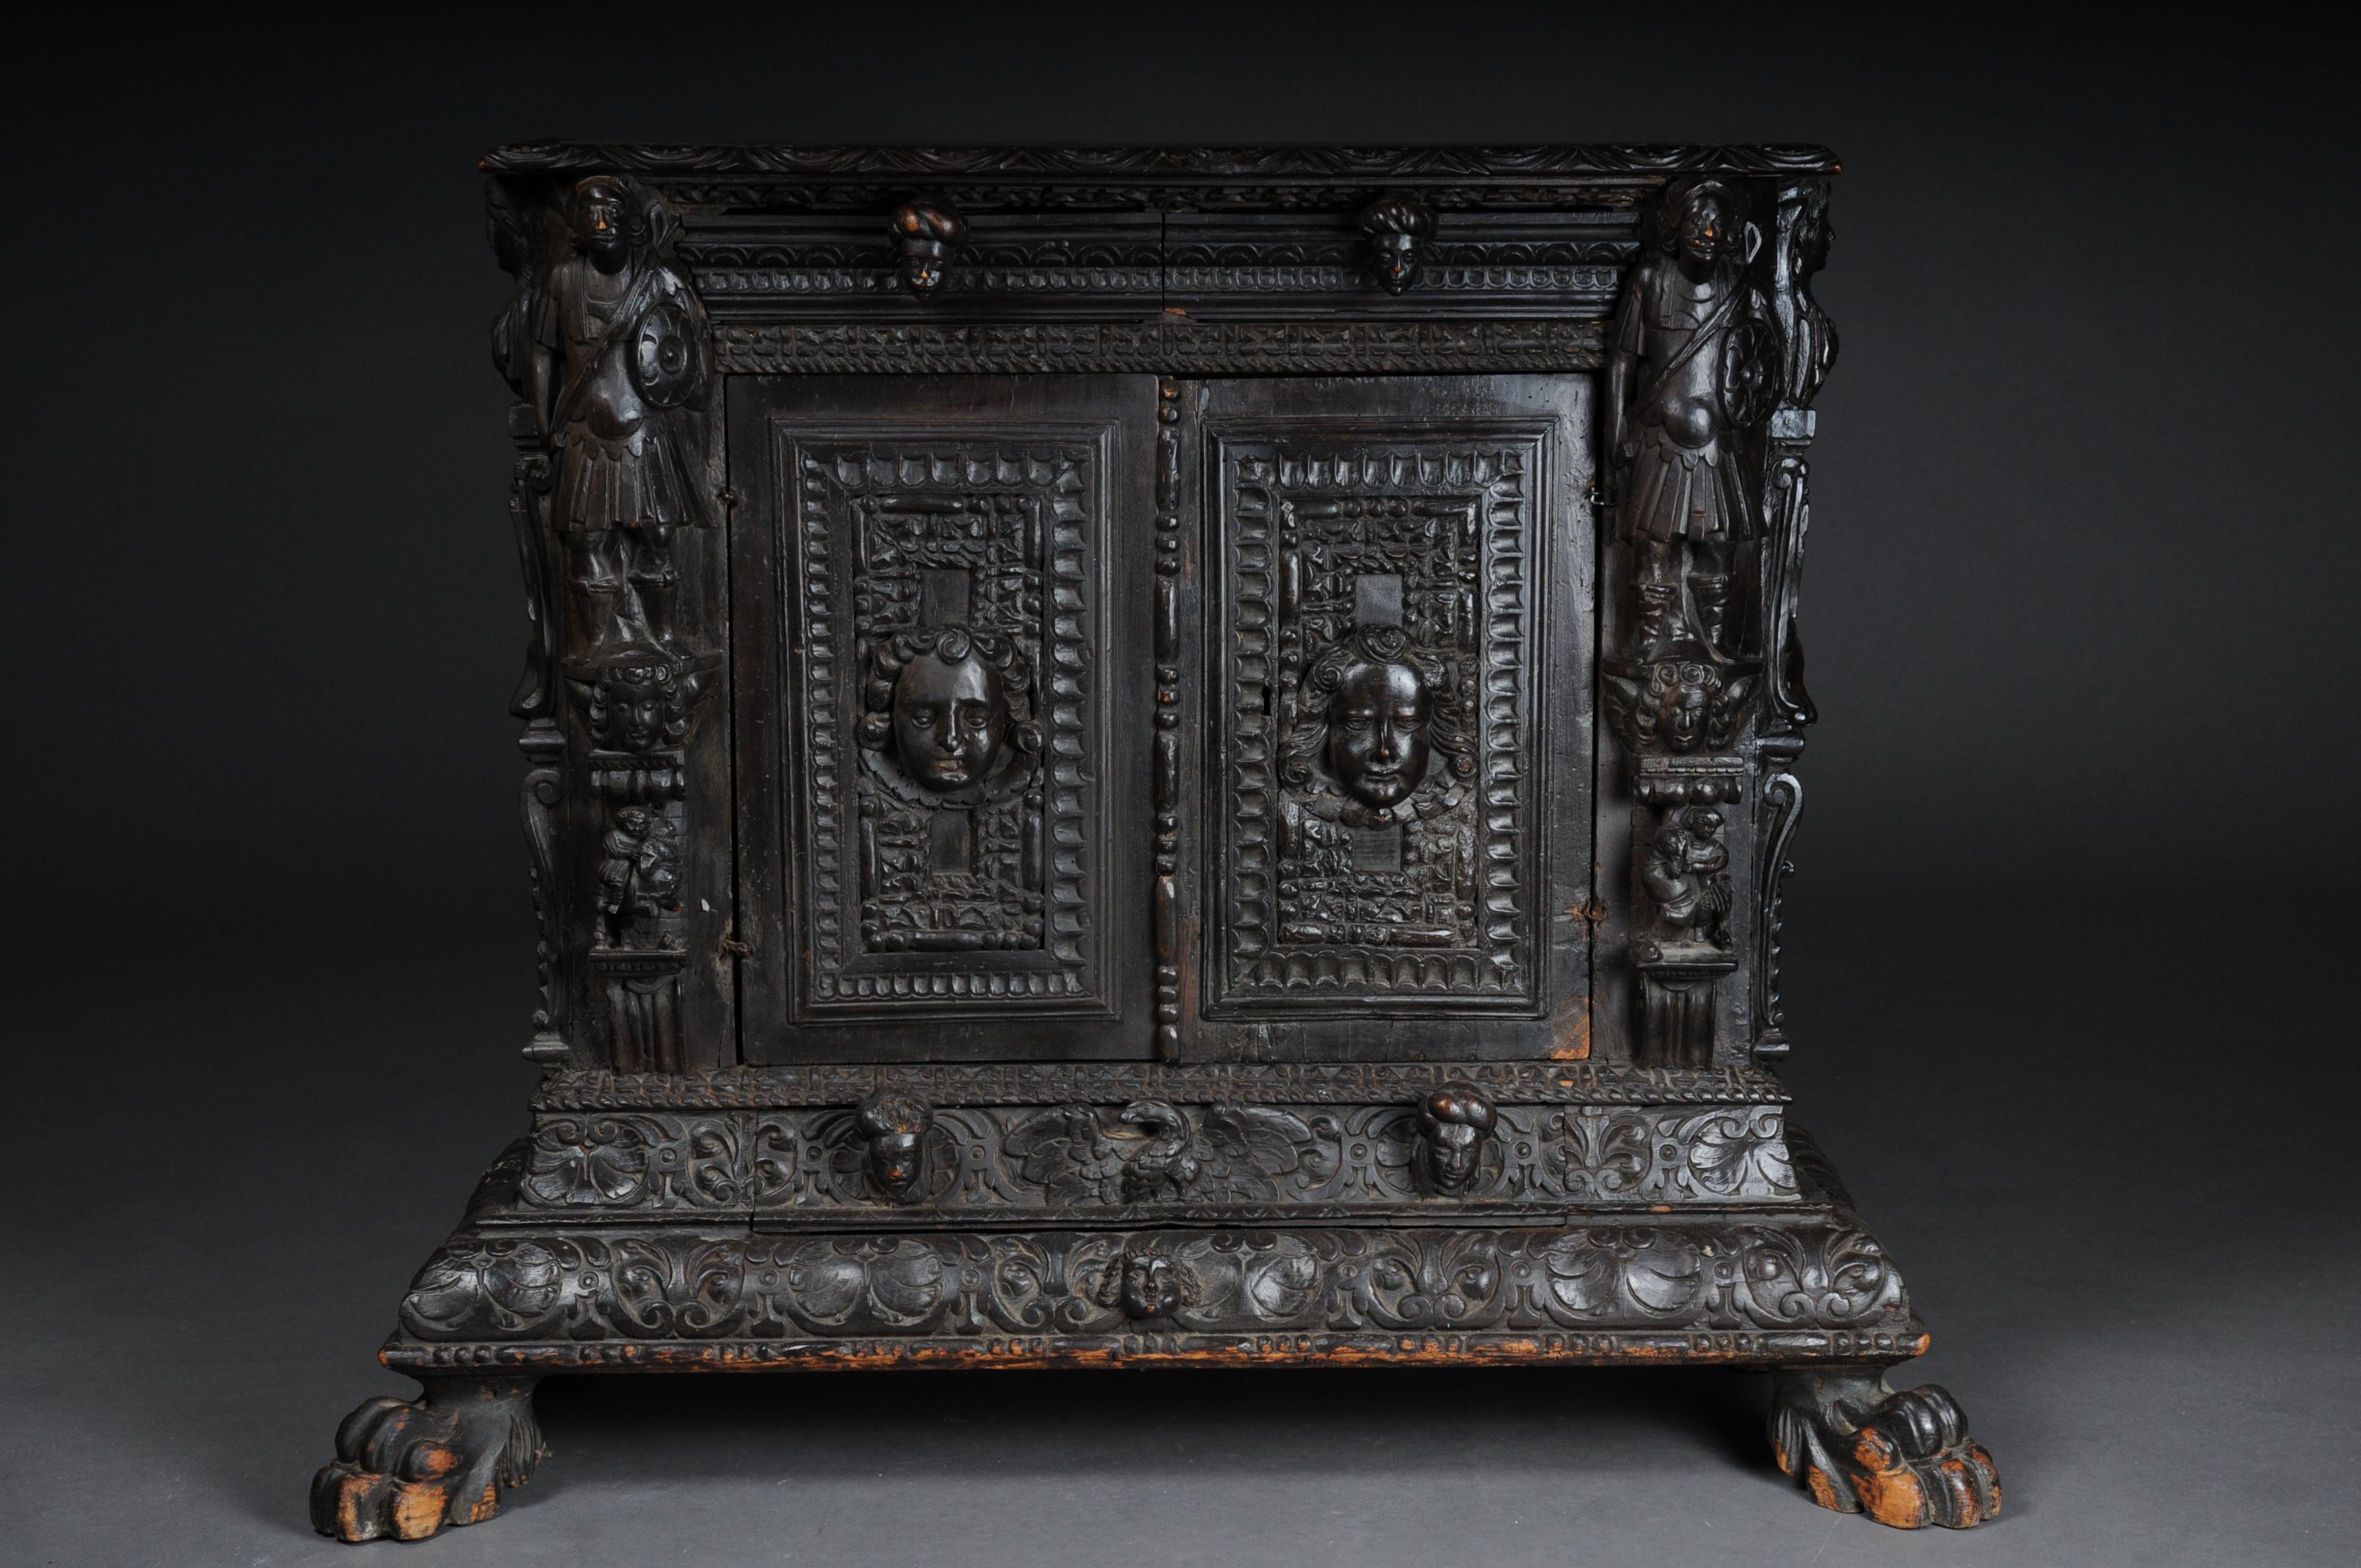 Museum chest of drawers Renaissance probably 16th century

Solid wood blackened two-door body flanked by fully plastic figure elements.
Richly carved carving in the form of grotesque figures / mascarons.
Above the doors there are 2 drawers and a